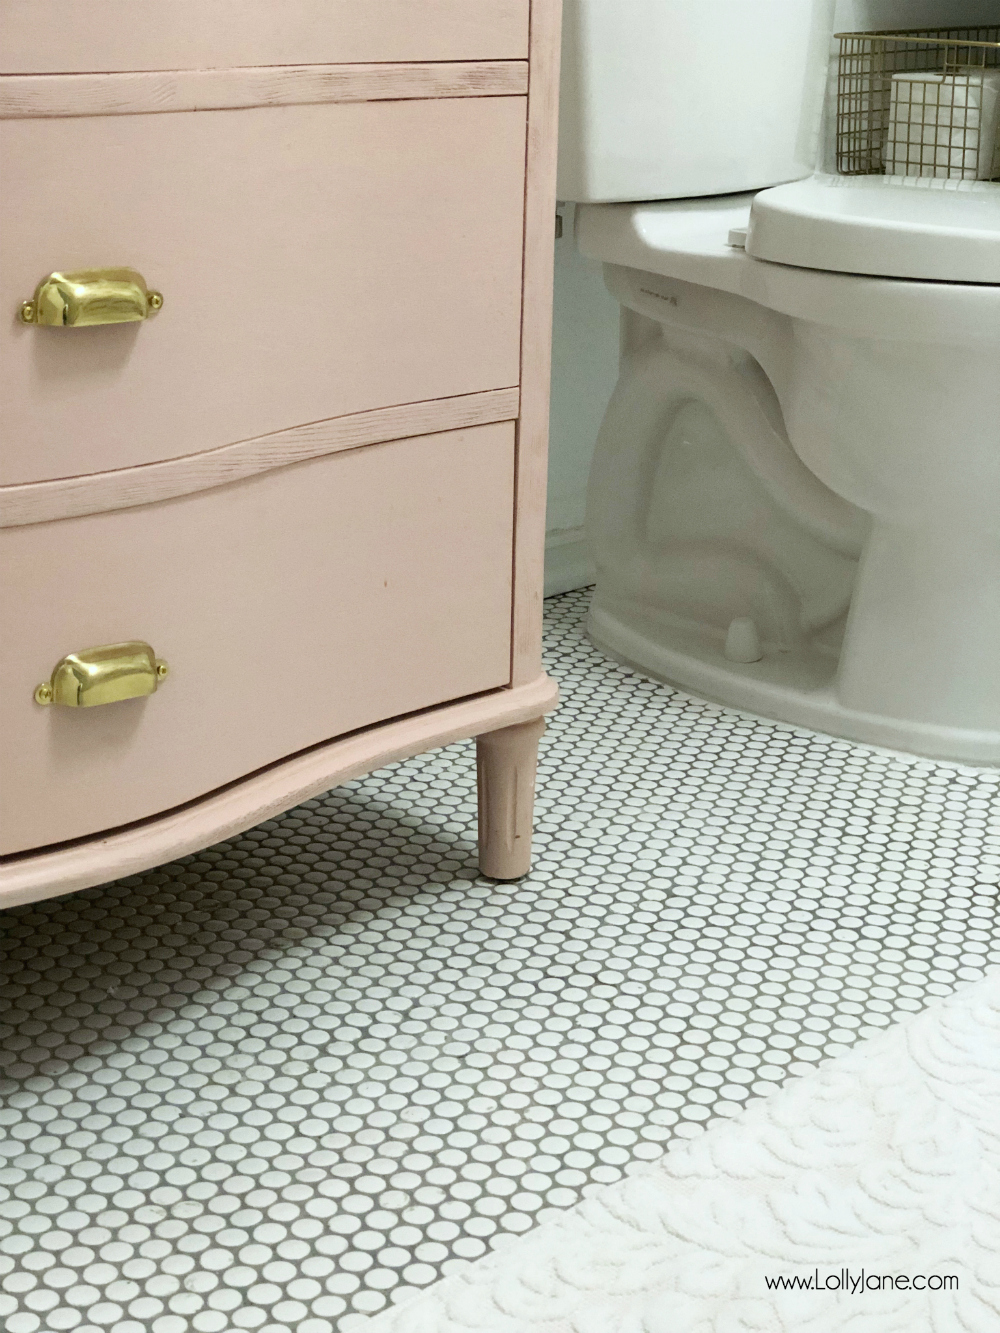 From Blah to Oooh-la-la! What an incredible painted PINK vanity (with concrete countetop!) in this pretty farmhouse bathroom!